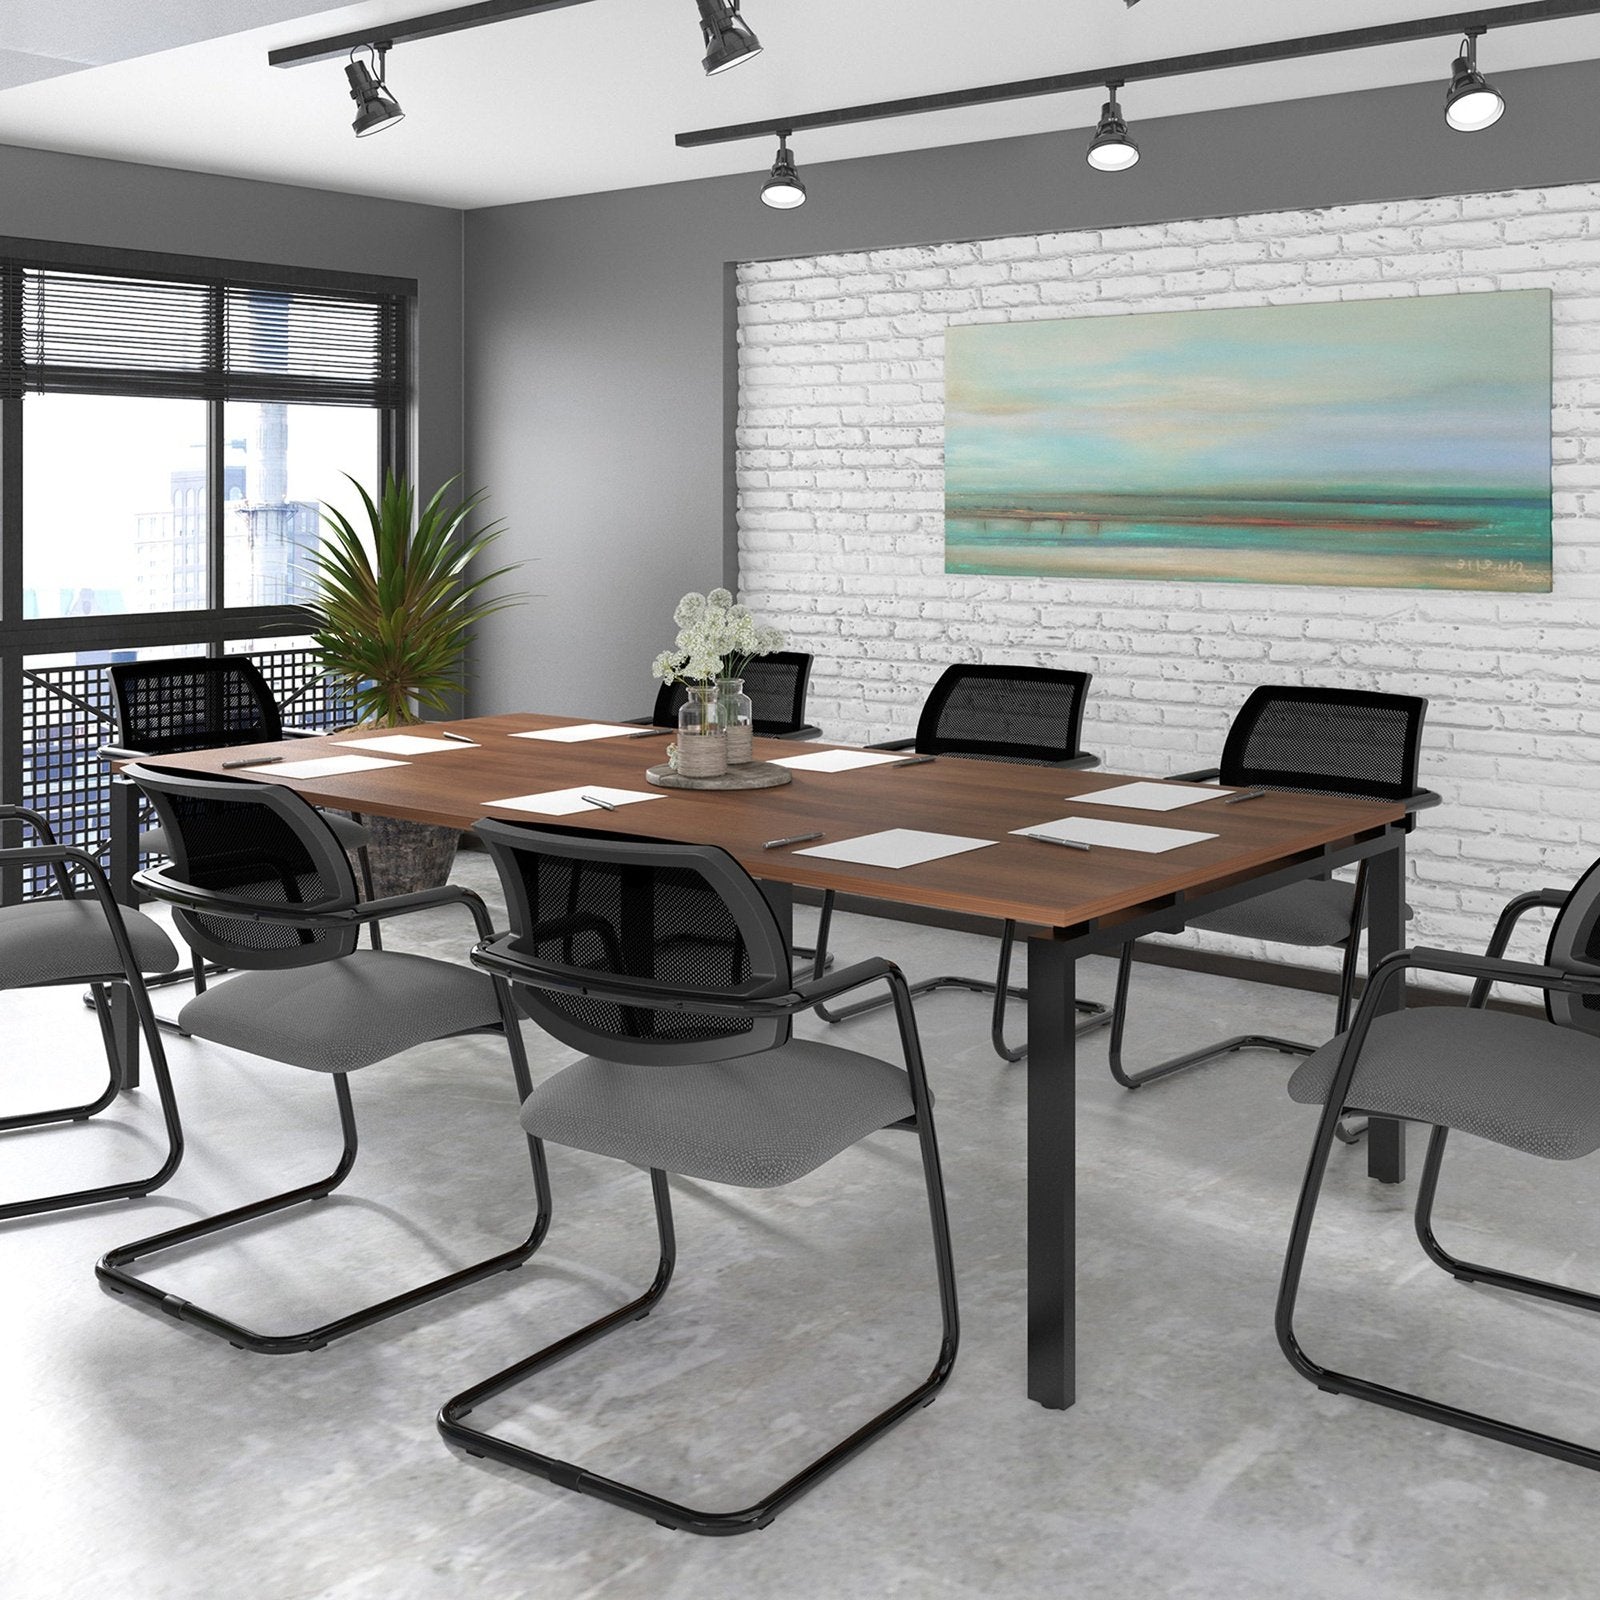 Adapt square boardroom table - Office Products Online